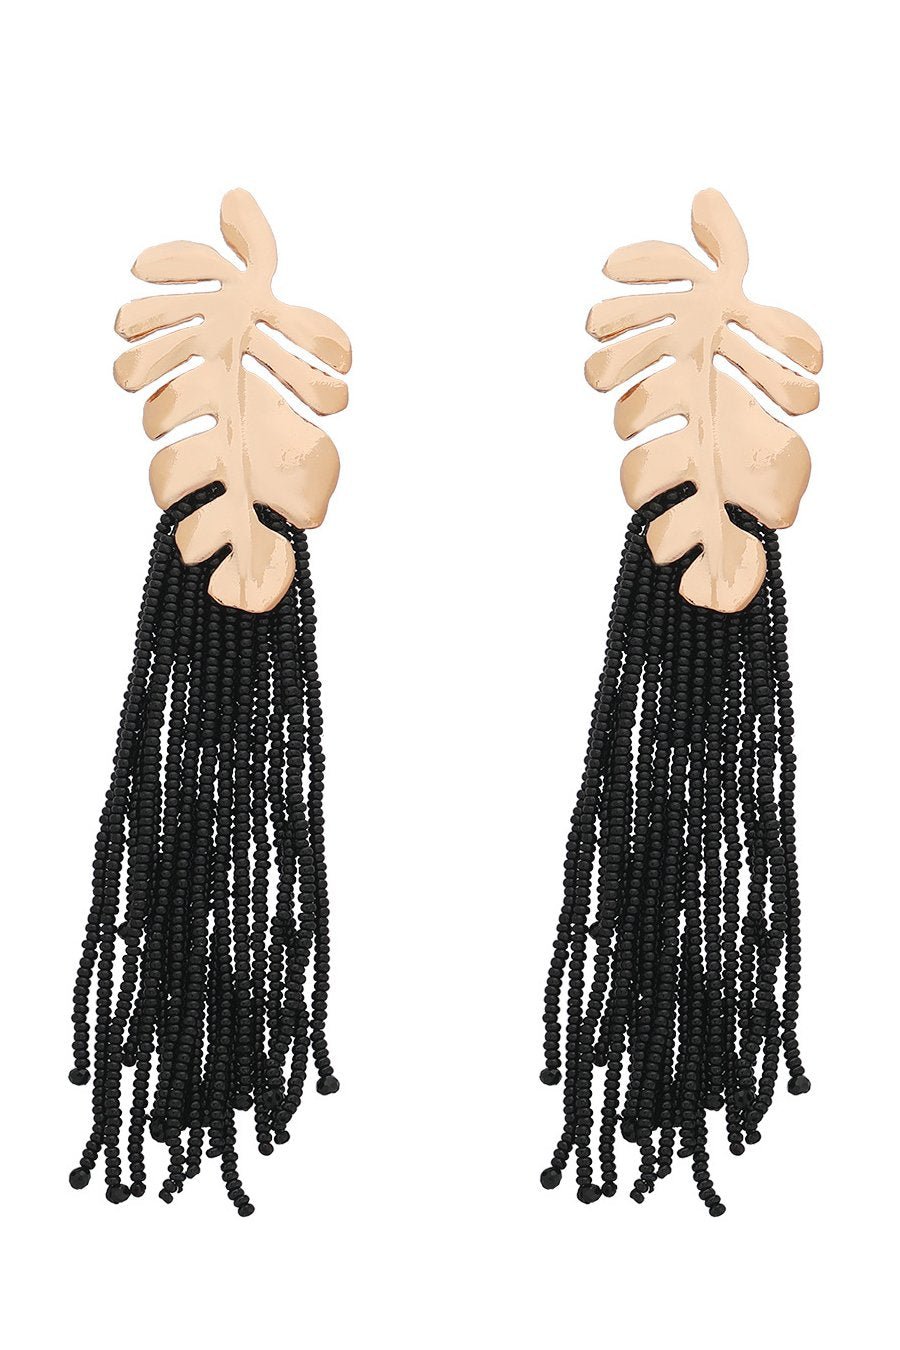 accessories-Palm Frond Beads Tassel Earring-SA00602262315-Black - Sunfere